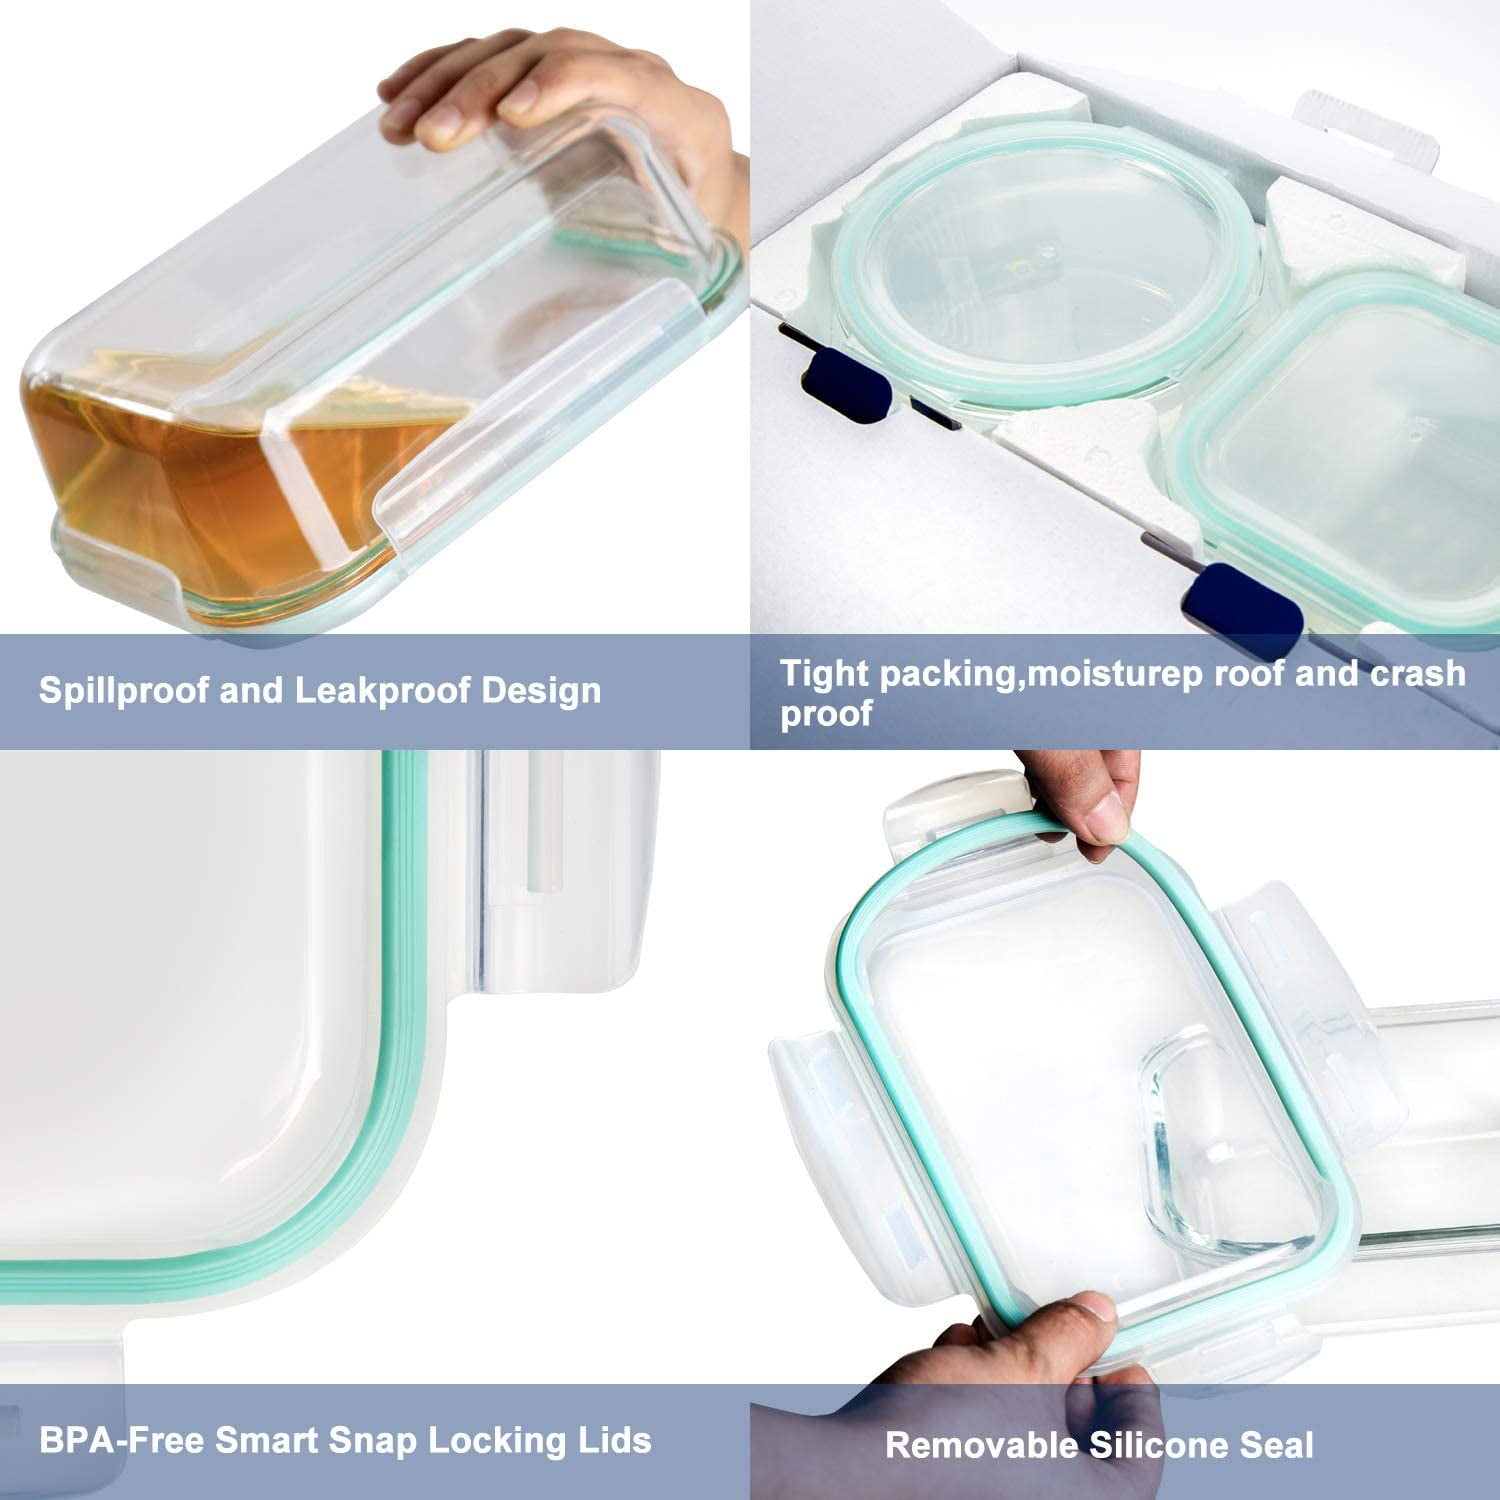 Bayco Glass Food Storage Containers – Shop Elevated Lifestyle